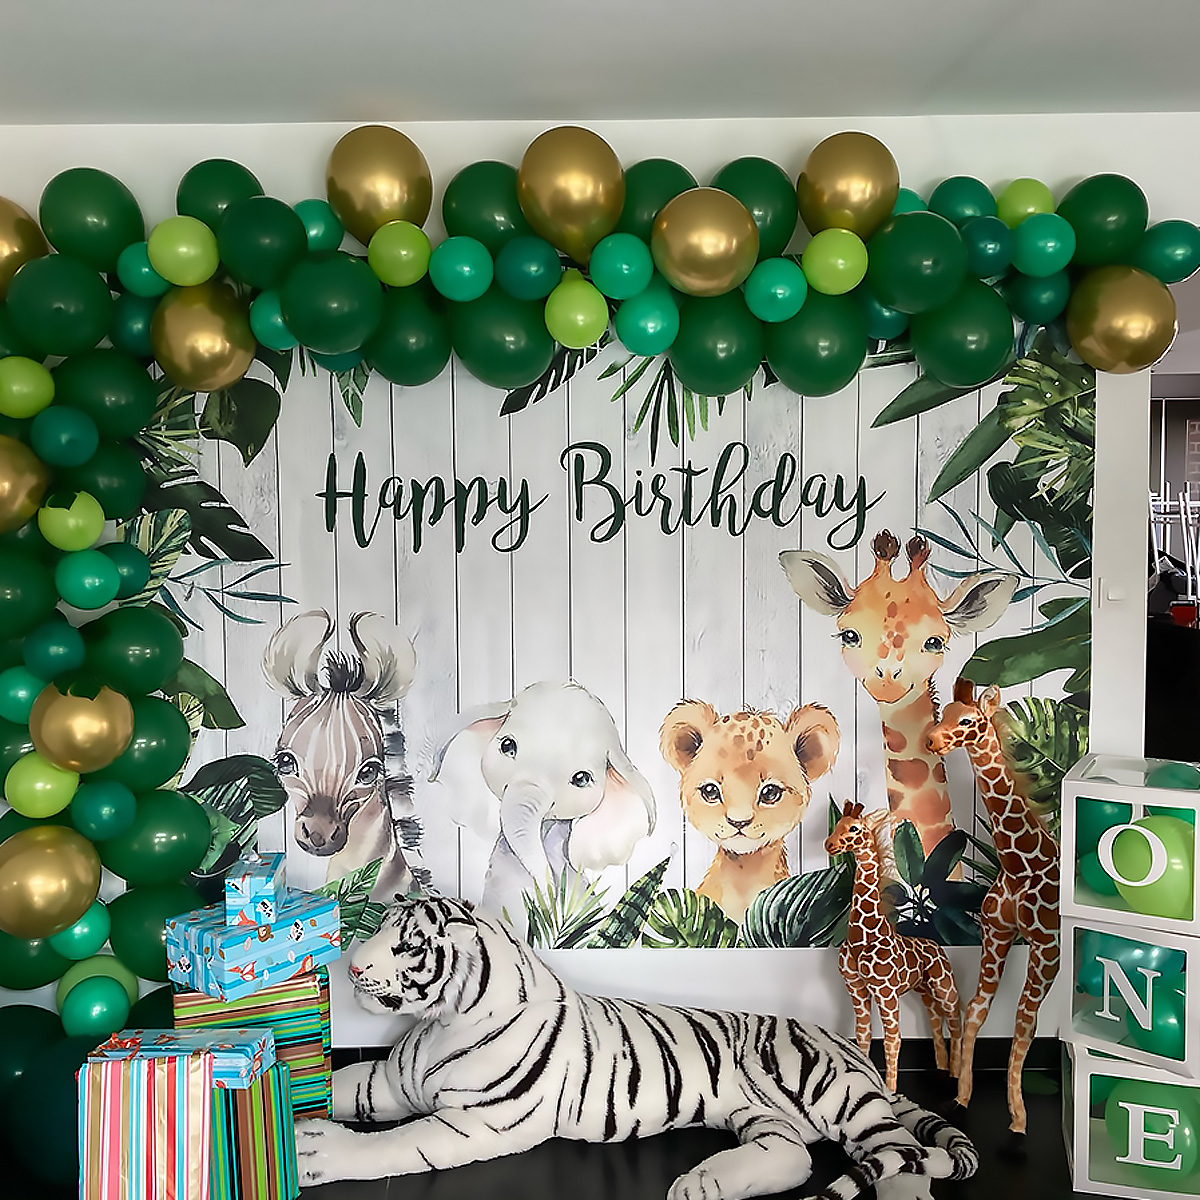 3-Size-Jungle-Green-Forest-Backdrop-Happy-Birthday-Background-Photography-Woodland-Party-Prop-1876181-9